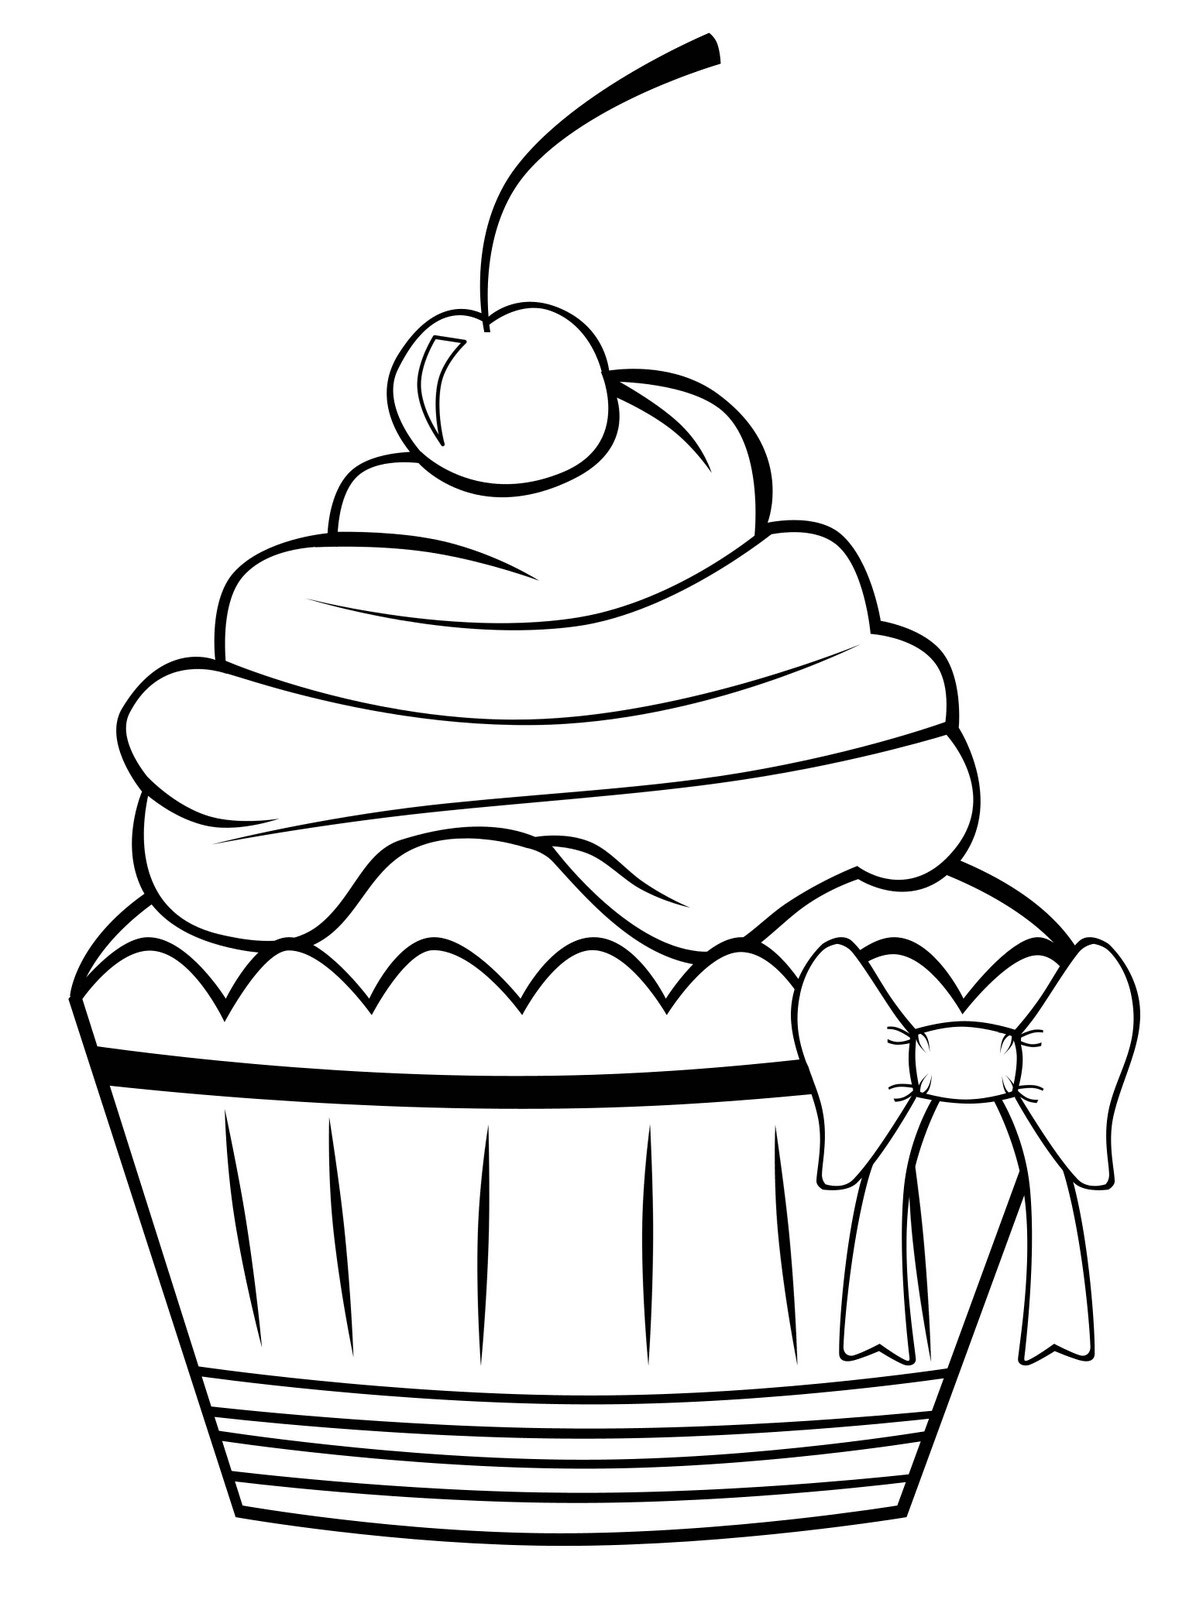 Cupcake Printable Coloring Pages
 Kids Coloring Pages Cupcake Coloring Pages